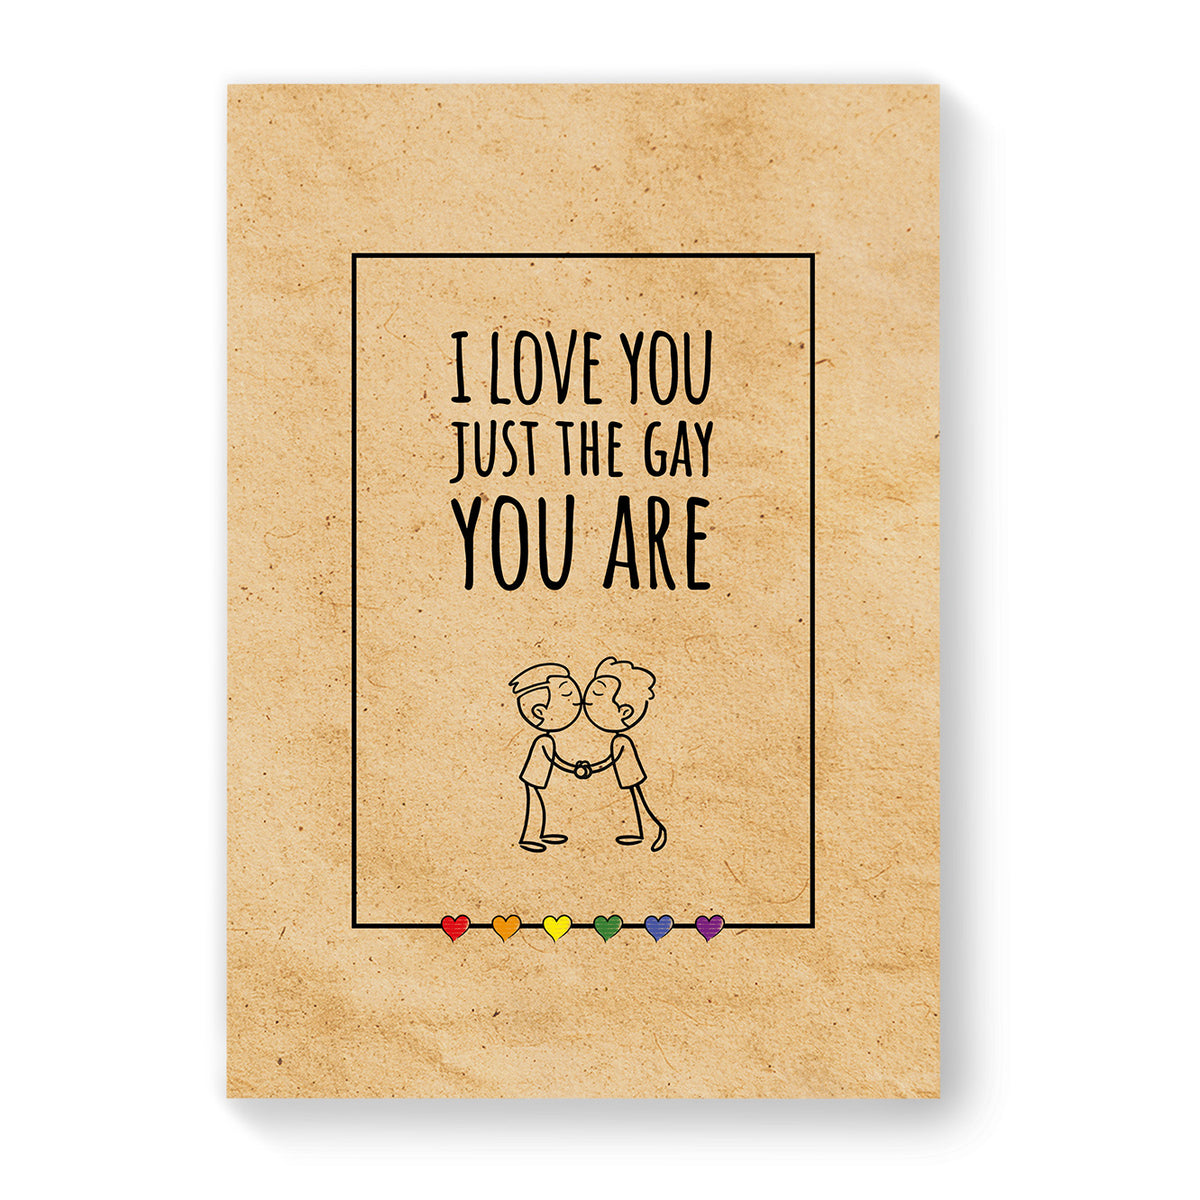 I love you just the gay you are - Gay Couple Card - Vintage Brown | Gift